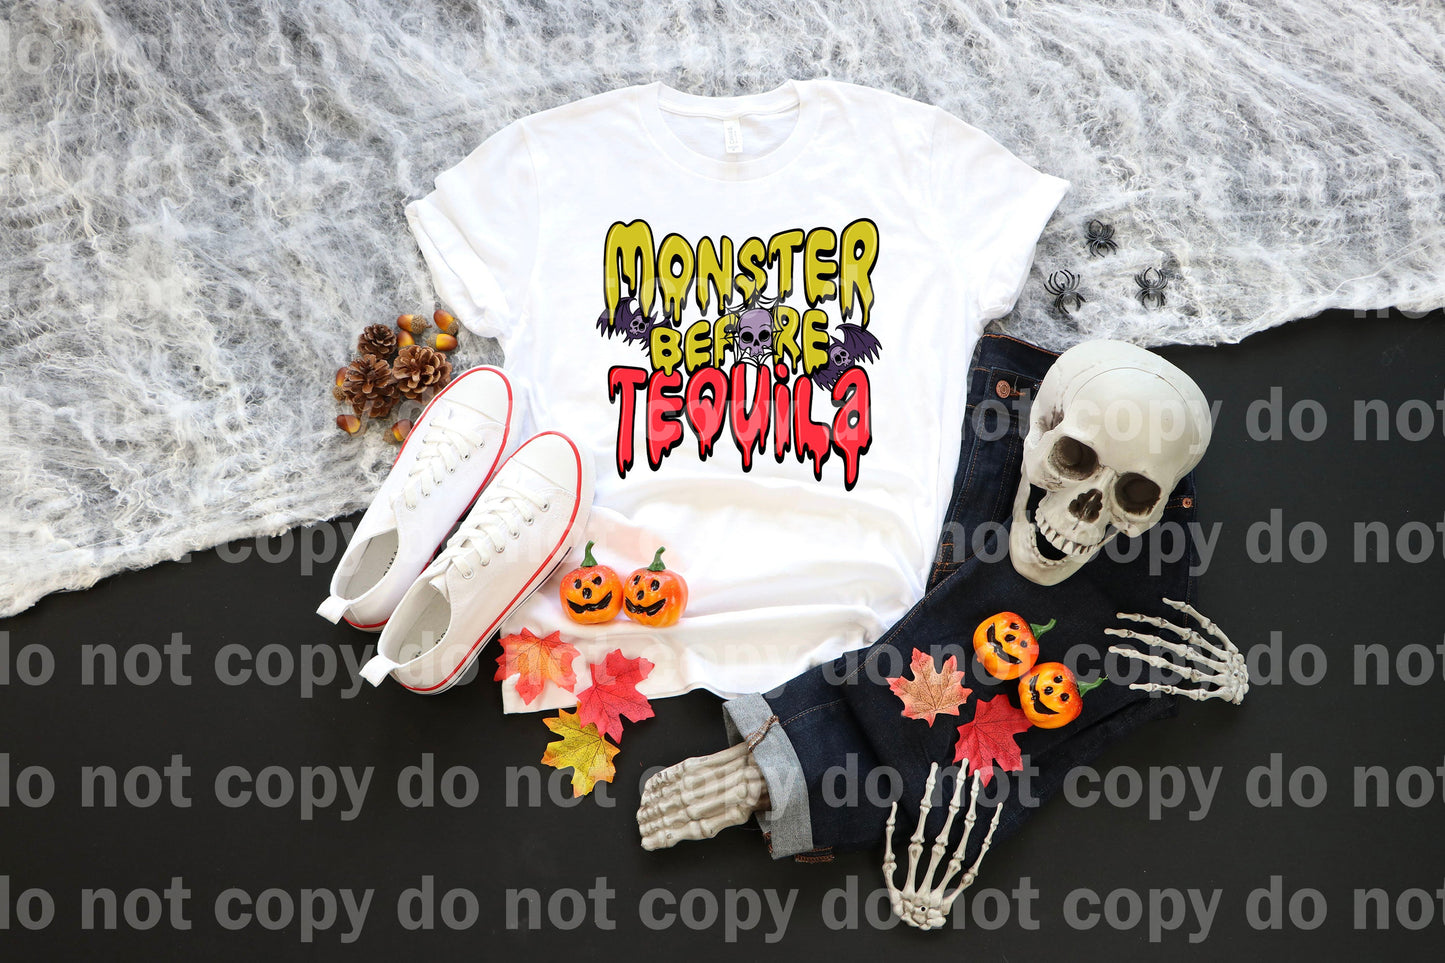 Monster Before Tequila with Optional Sleeve Design Dream Print or Sublimation Print